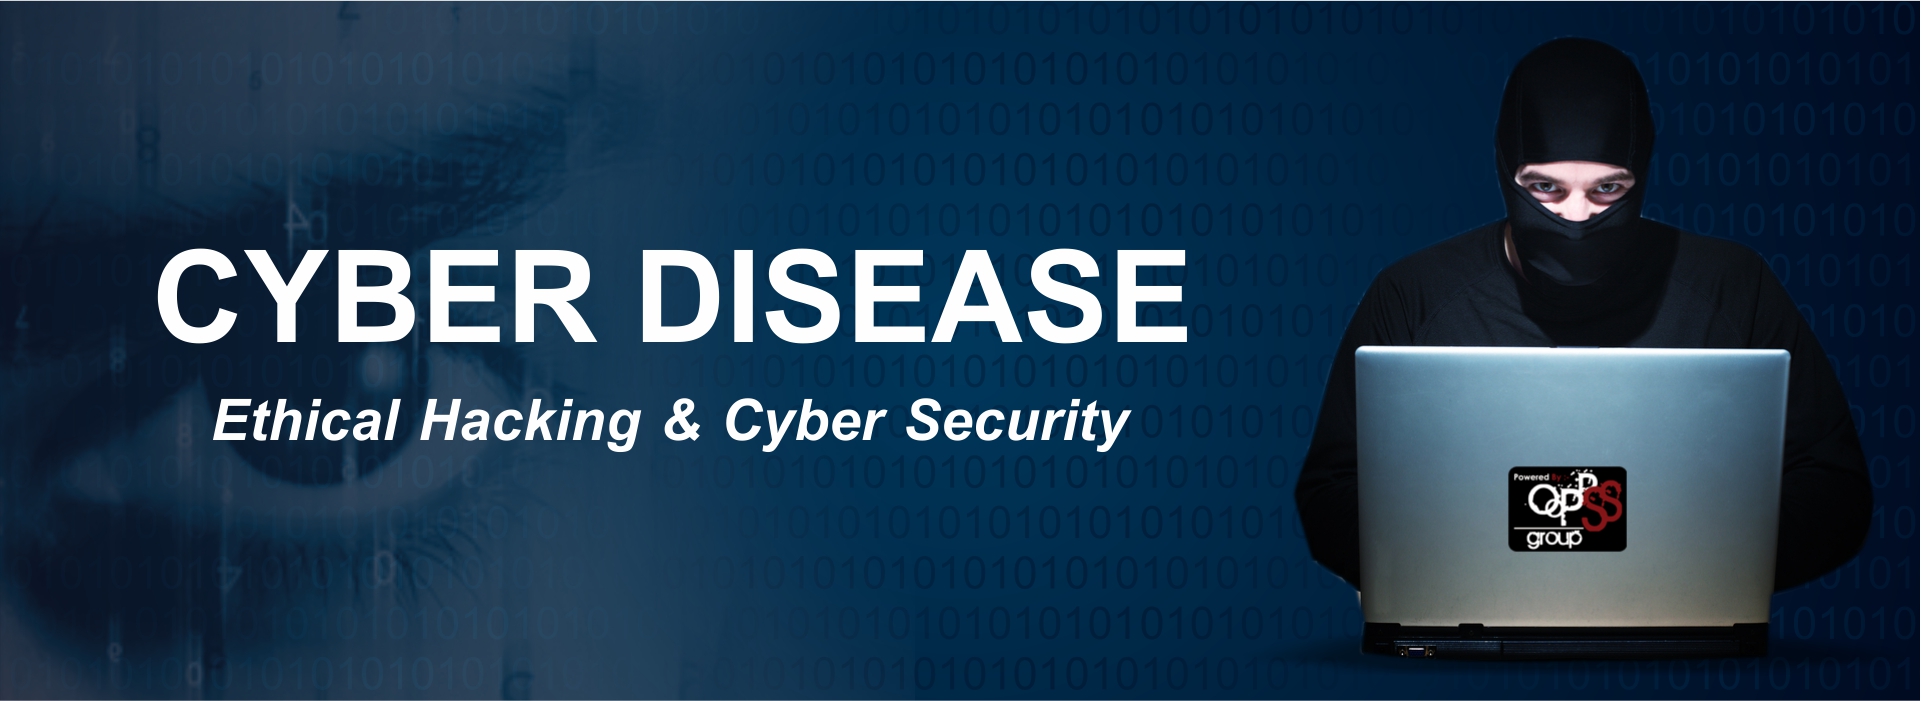 Cyber Disease Workshop on Ethical Hacking and Cyber Security 